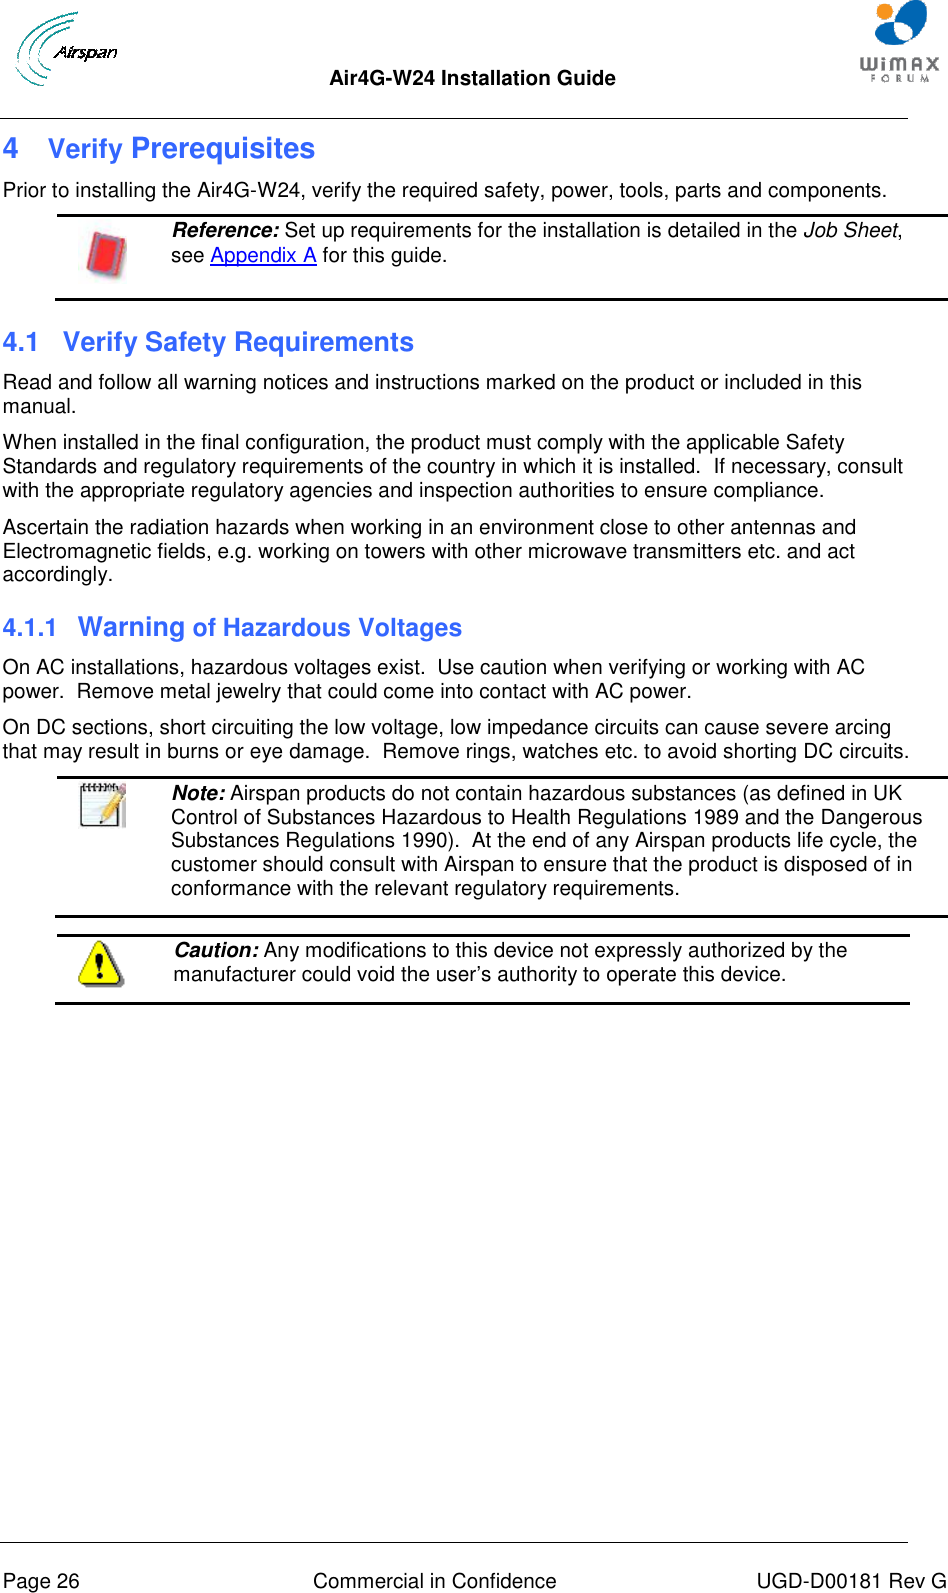  Air4G-W24 Installation Guide       Page 26  Commercial in Confidence  UGD-D00181 Rev G 4  Verify Prerequisites Prior to installing the Air4G-W24, verify the required safety, power, tools, parts and components.  Reference: Set up requirements for the installation is detailed in the Job Sheet, see Appendix A for this guide. 4.1  Verify Safety Requirements Read and follow all warning notices and instructions marked on the product or included in this manual. When installed in the final configuration, the product must comply with the applicable Safety Standards and regulatory requirements of the country in which it is installed.  If necessary, consult with the appropriate regulatory agencies and inspection authorities to ensure compliance. Ascertain the radiation hazards when working in an environment close to other antennas and Electromagnetic fields, e.g. working on towers with other microwave transmitters etc. and act accordingly. 4.1.1  Warning of Hazardous Voltages On AC installations, hazardous voltages exist.  Use caution when verifying or working with AC power.  Remove metal jewelry that could come into contact with AC power. On DC sections, short circuiting the low voltage, low impedance circuits can cause severe arcing that may result in burns or eye damage.  Remove rings, watches etc. to avoid shorting DC circuits.   Note: Airspan products do not contain hazardous substances (as defined in UK Control of Substances Hazardous to Health Regulations 1989 and the Dangerous Substances Regulations 1990).  At the end of any Airspan products life cycle, the customer should consult with Airspan to ensure that the product is disposed of in conformance with the relevant regulatory requirements.   Caution: Any modifications to this device not expressly authorized by the manufacturer could void the user‟s authority to operate this device.  